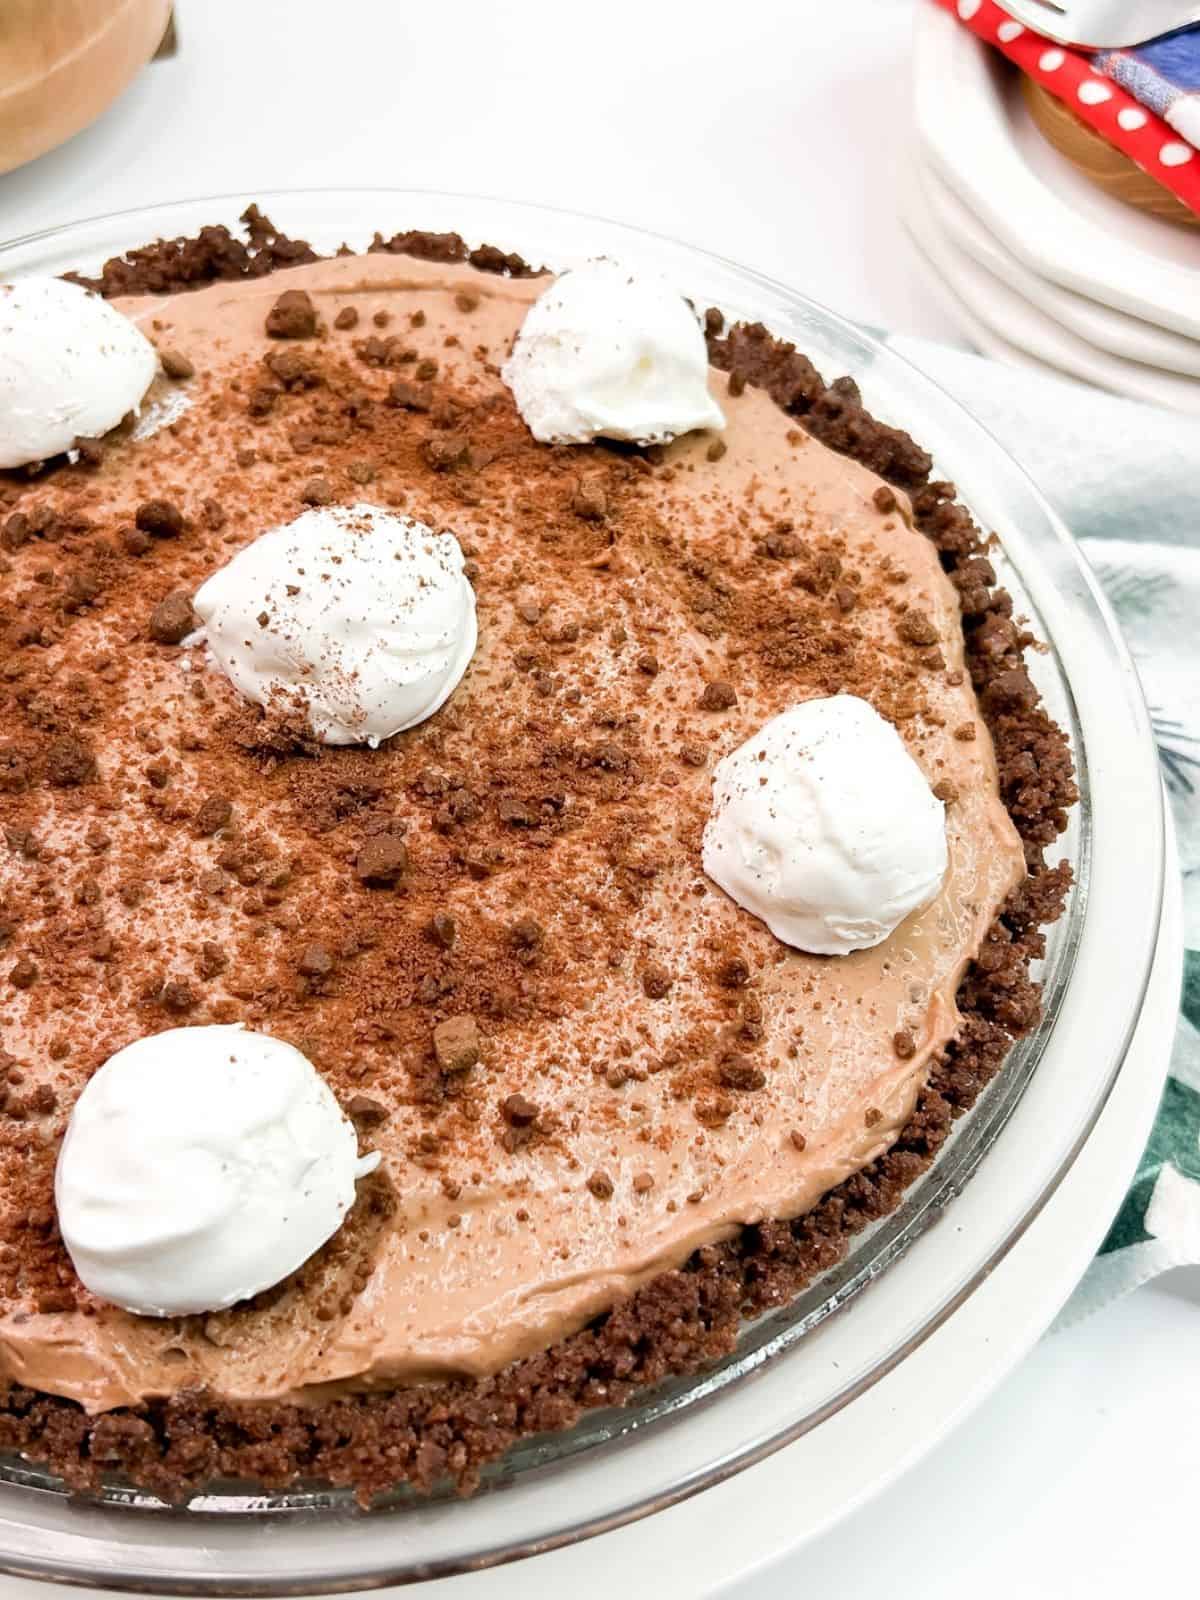 Chocolate pie with whipped cream dollops on top.